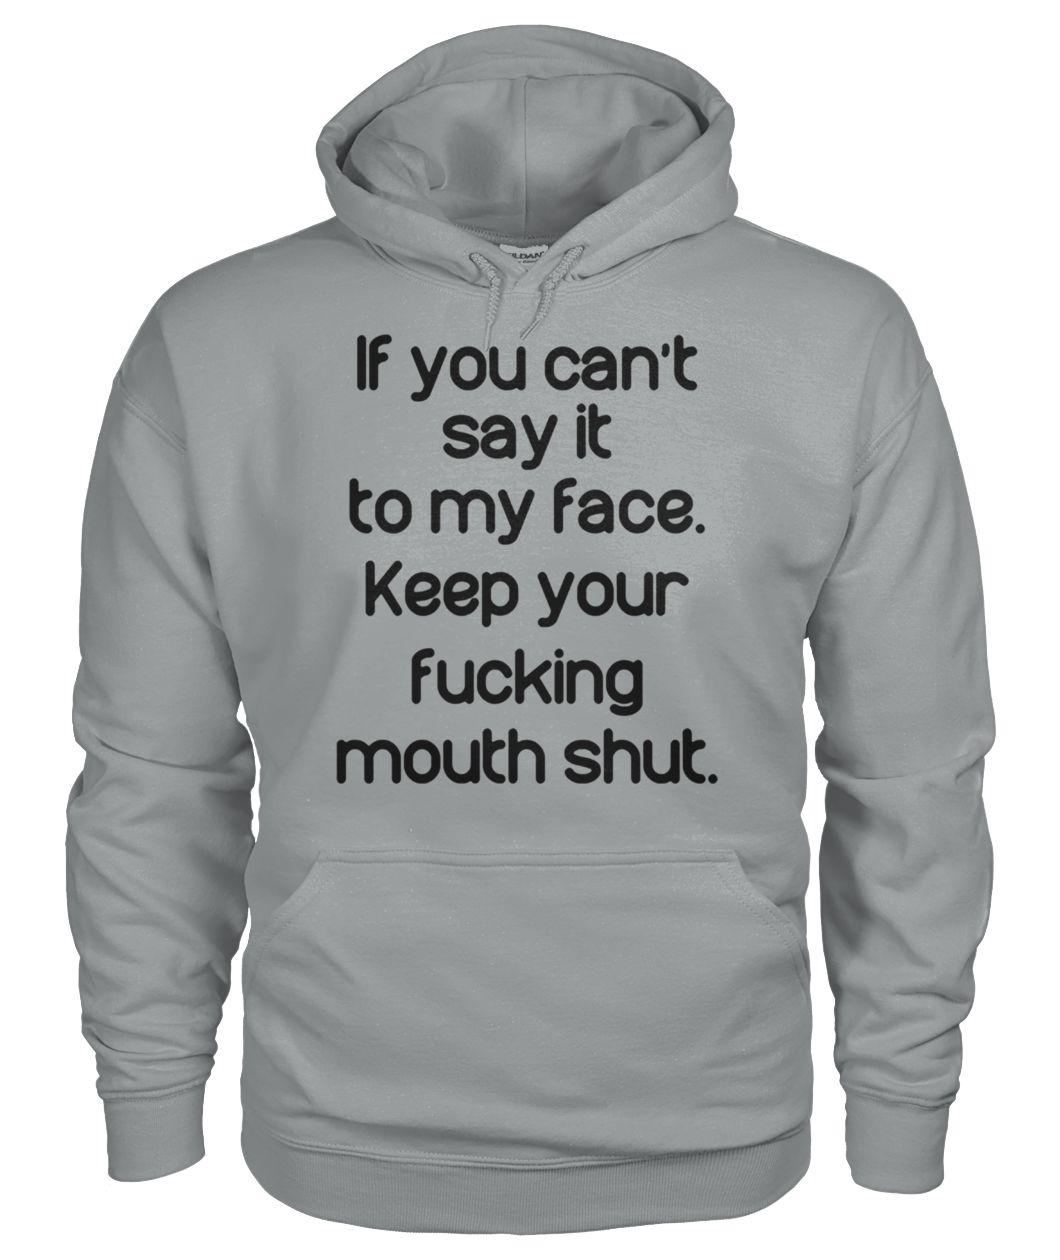 If you can't say it to my face keep your fucking mouth shut gildan hoodie